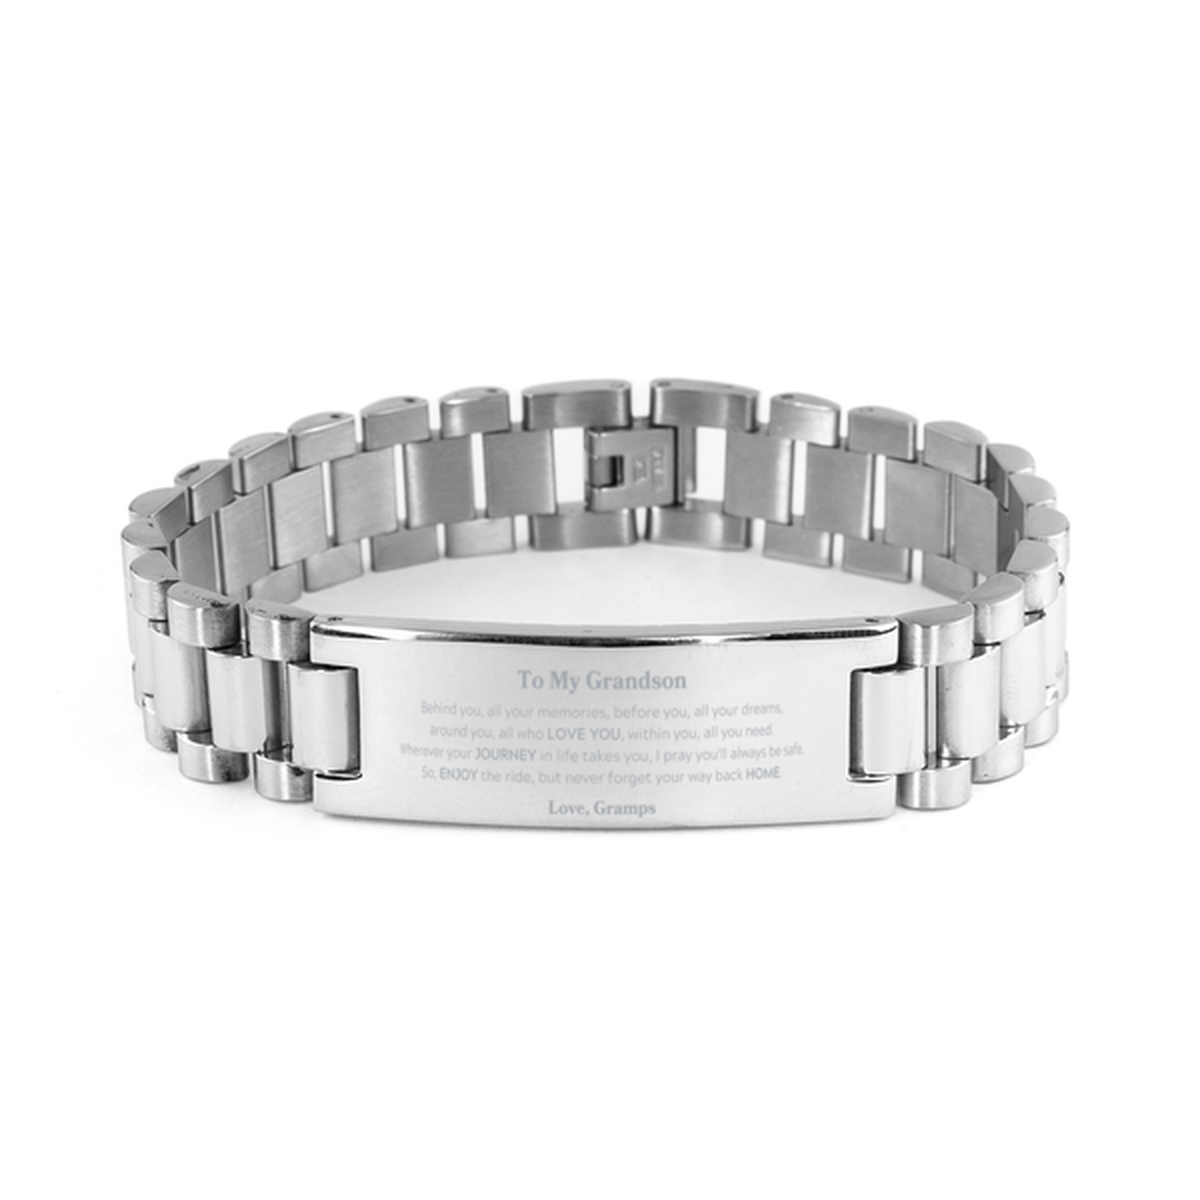 To My Grandson Graduation Gifts from Gramps, Grandson Ladder Stainless Steel Bracelet Christmas Birthday Gifts for Grandson Behind you, all your memories, before you, all your dreams. Love, Gramps